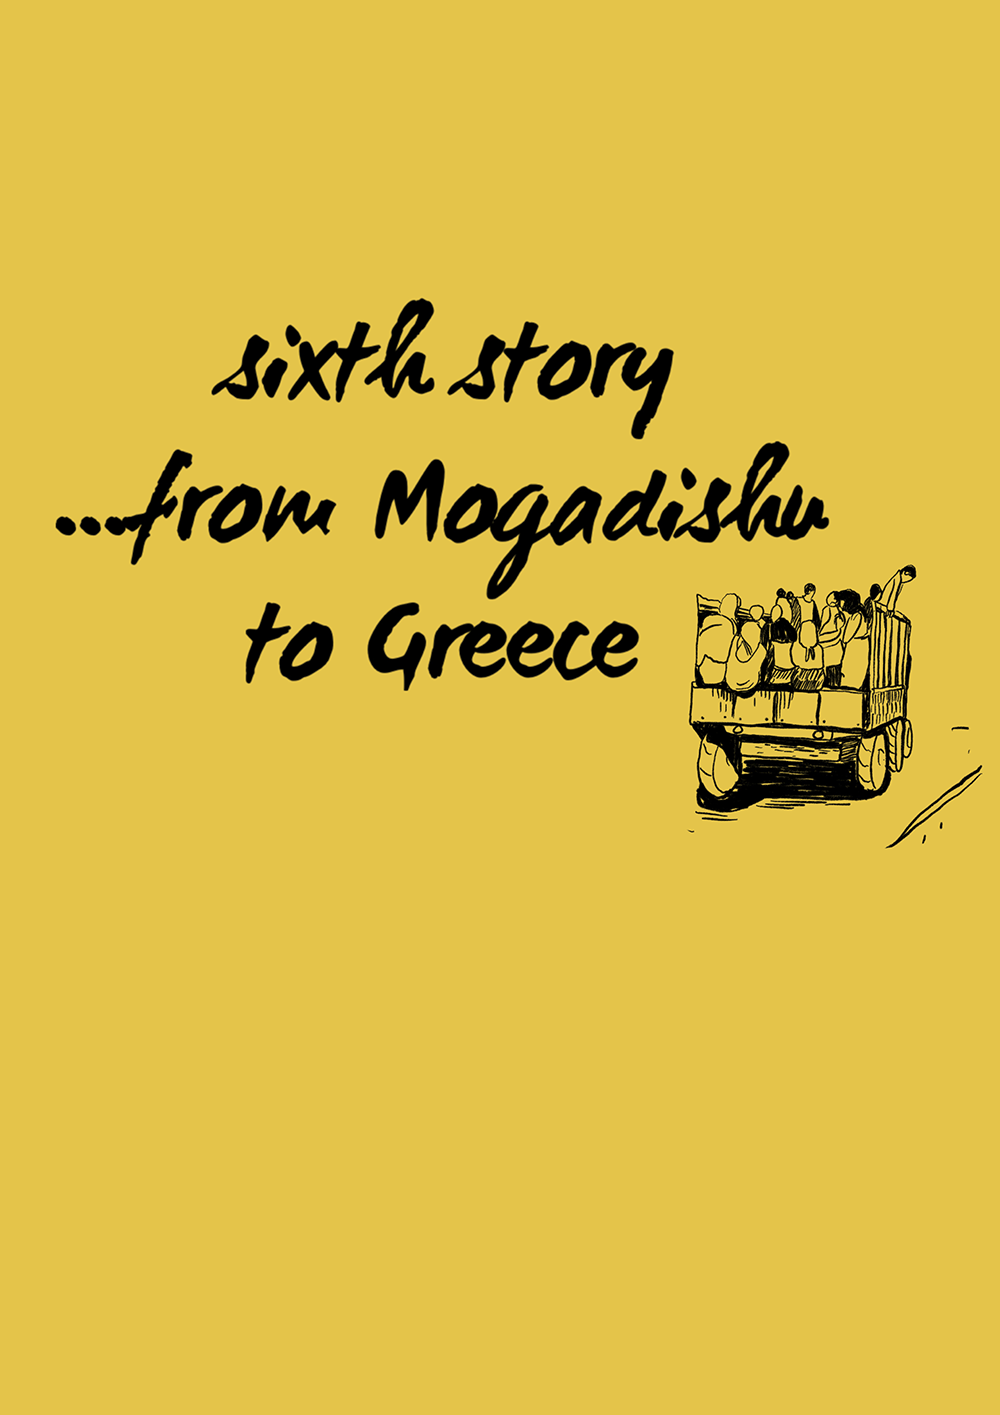 Counter stories: Sixth story ... from Mogadishu to Greece page 001